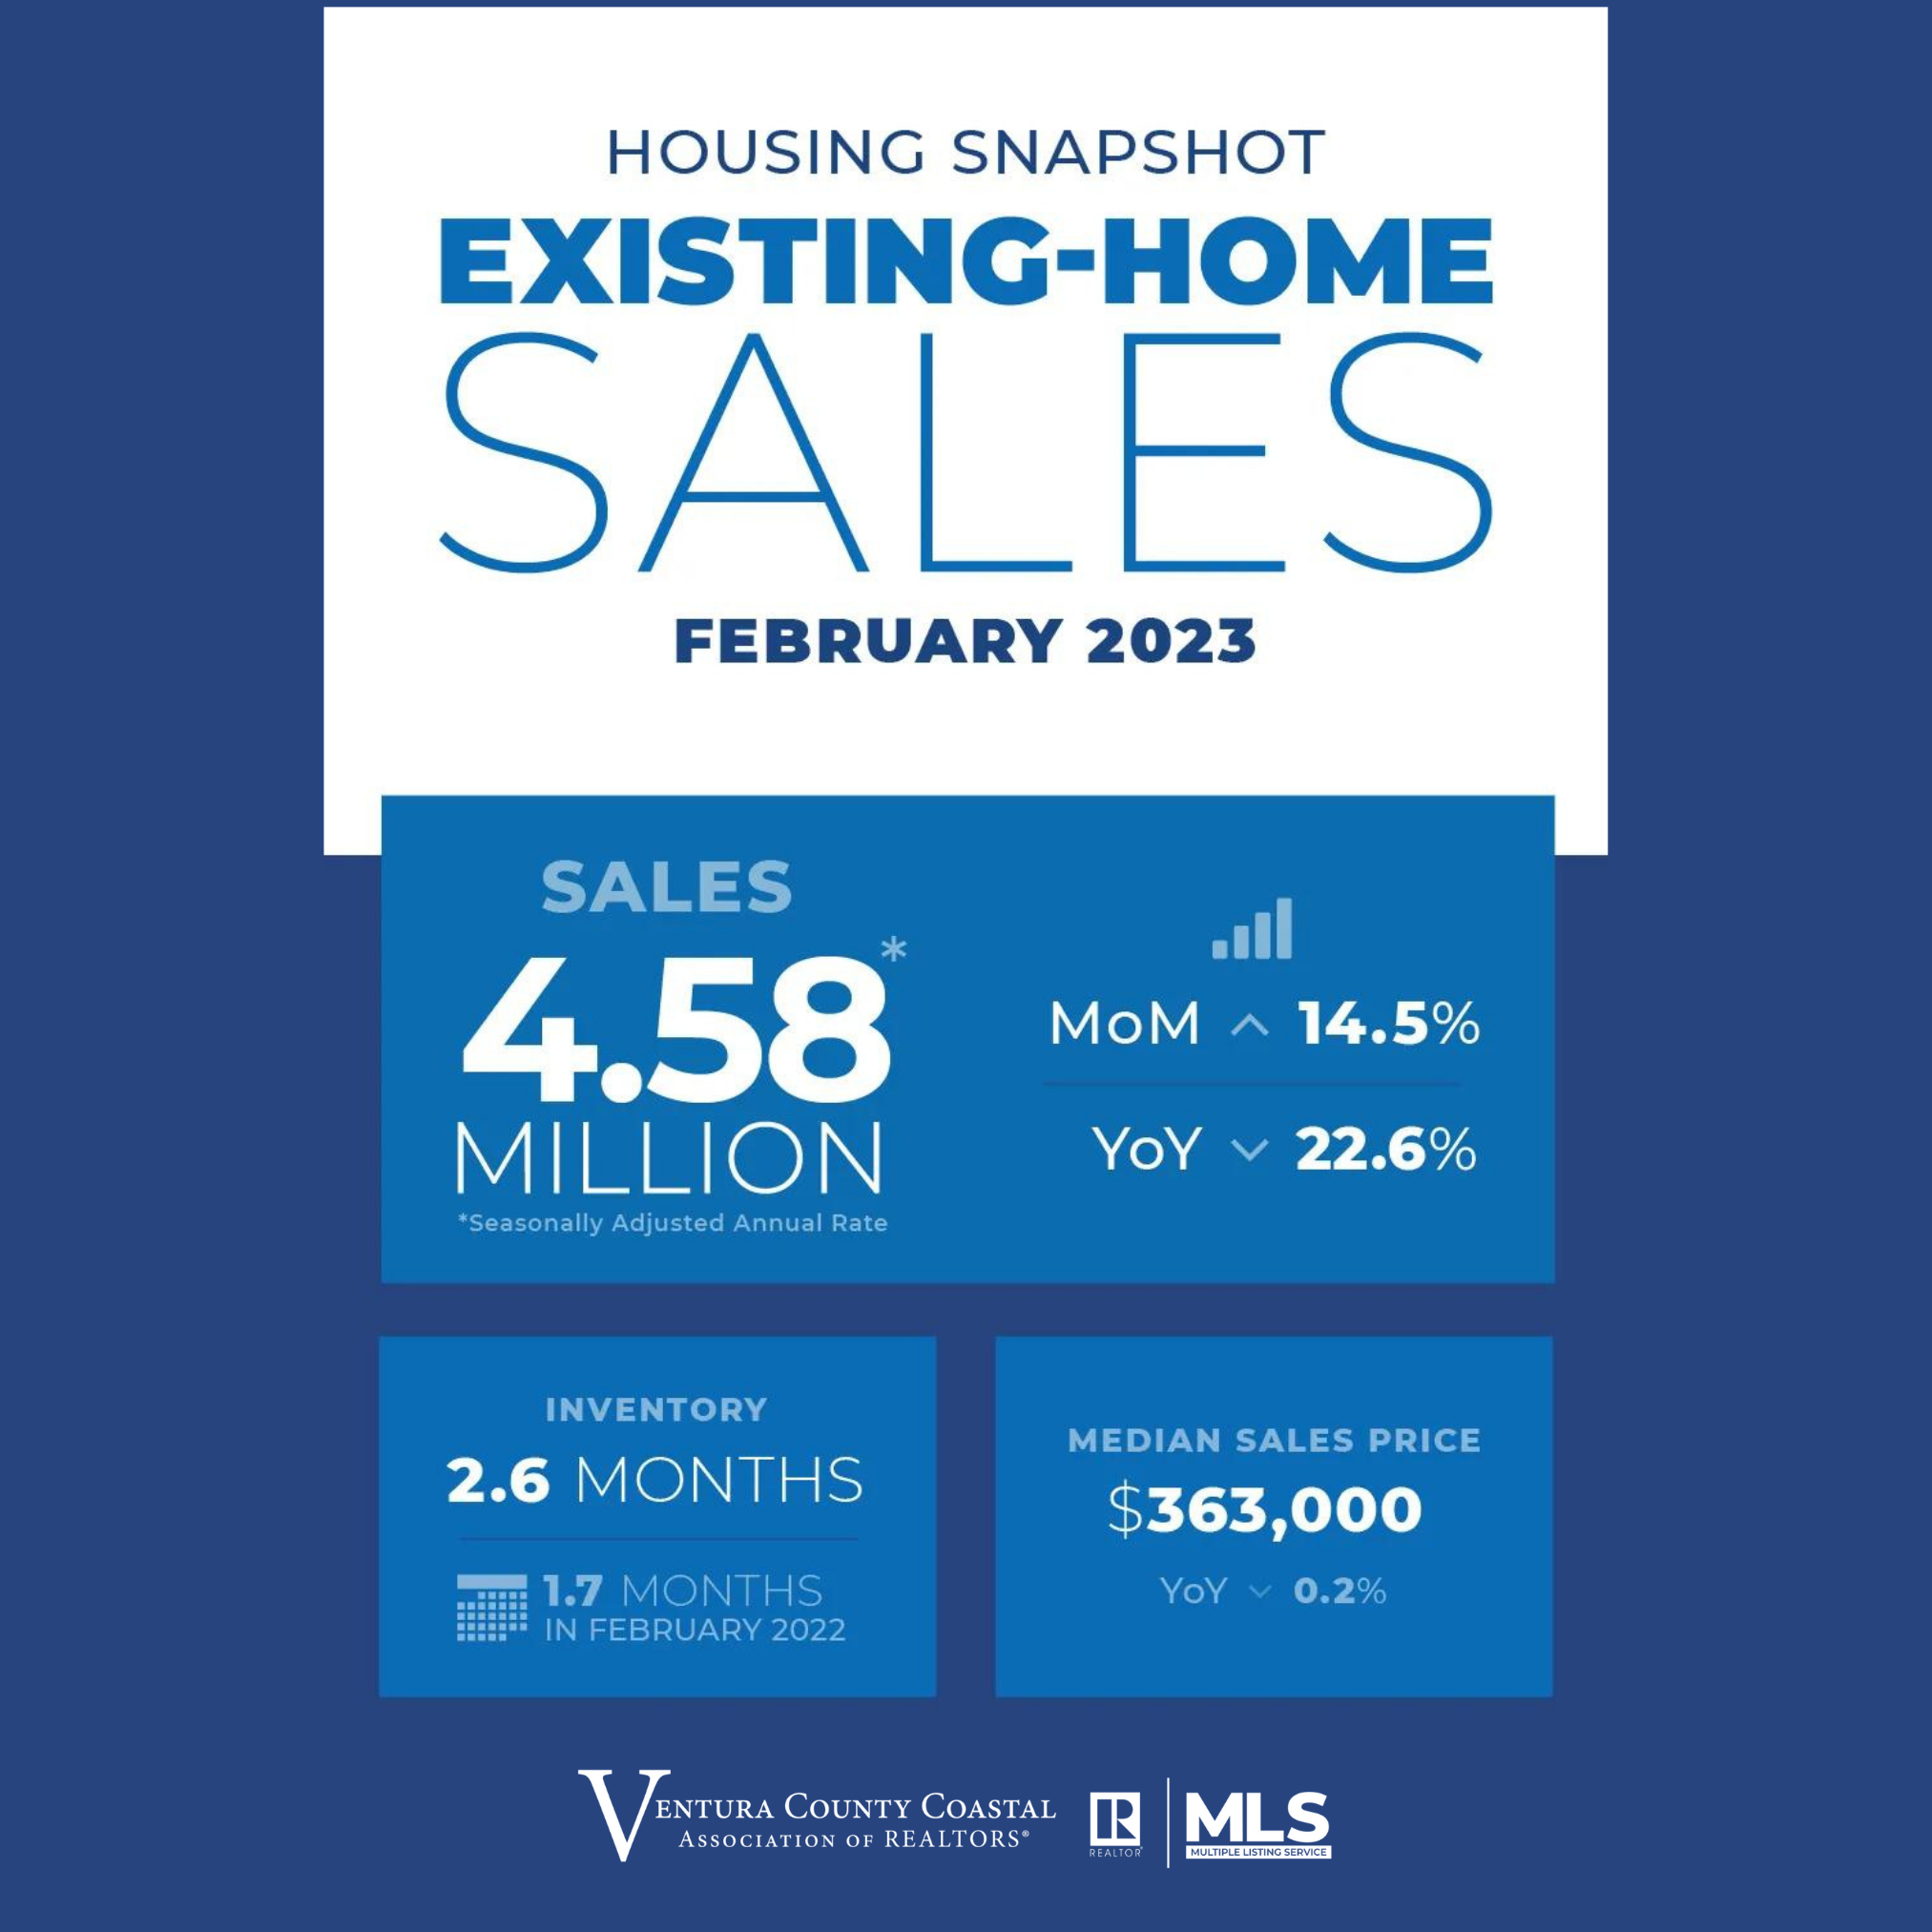 Housing Snapshot Existing Home Sales February 2023